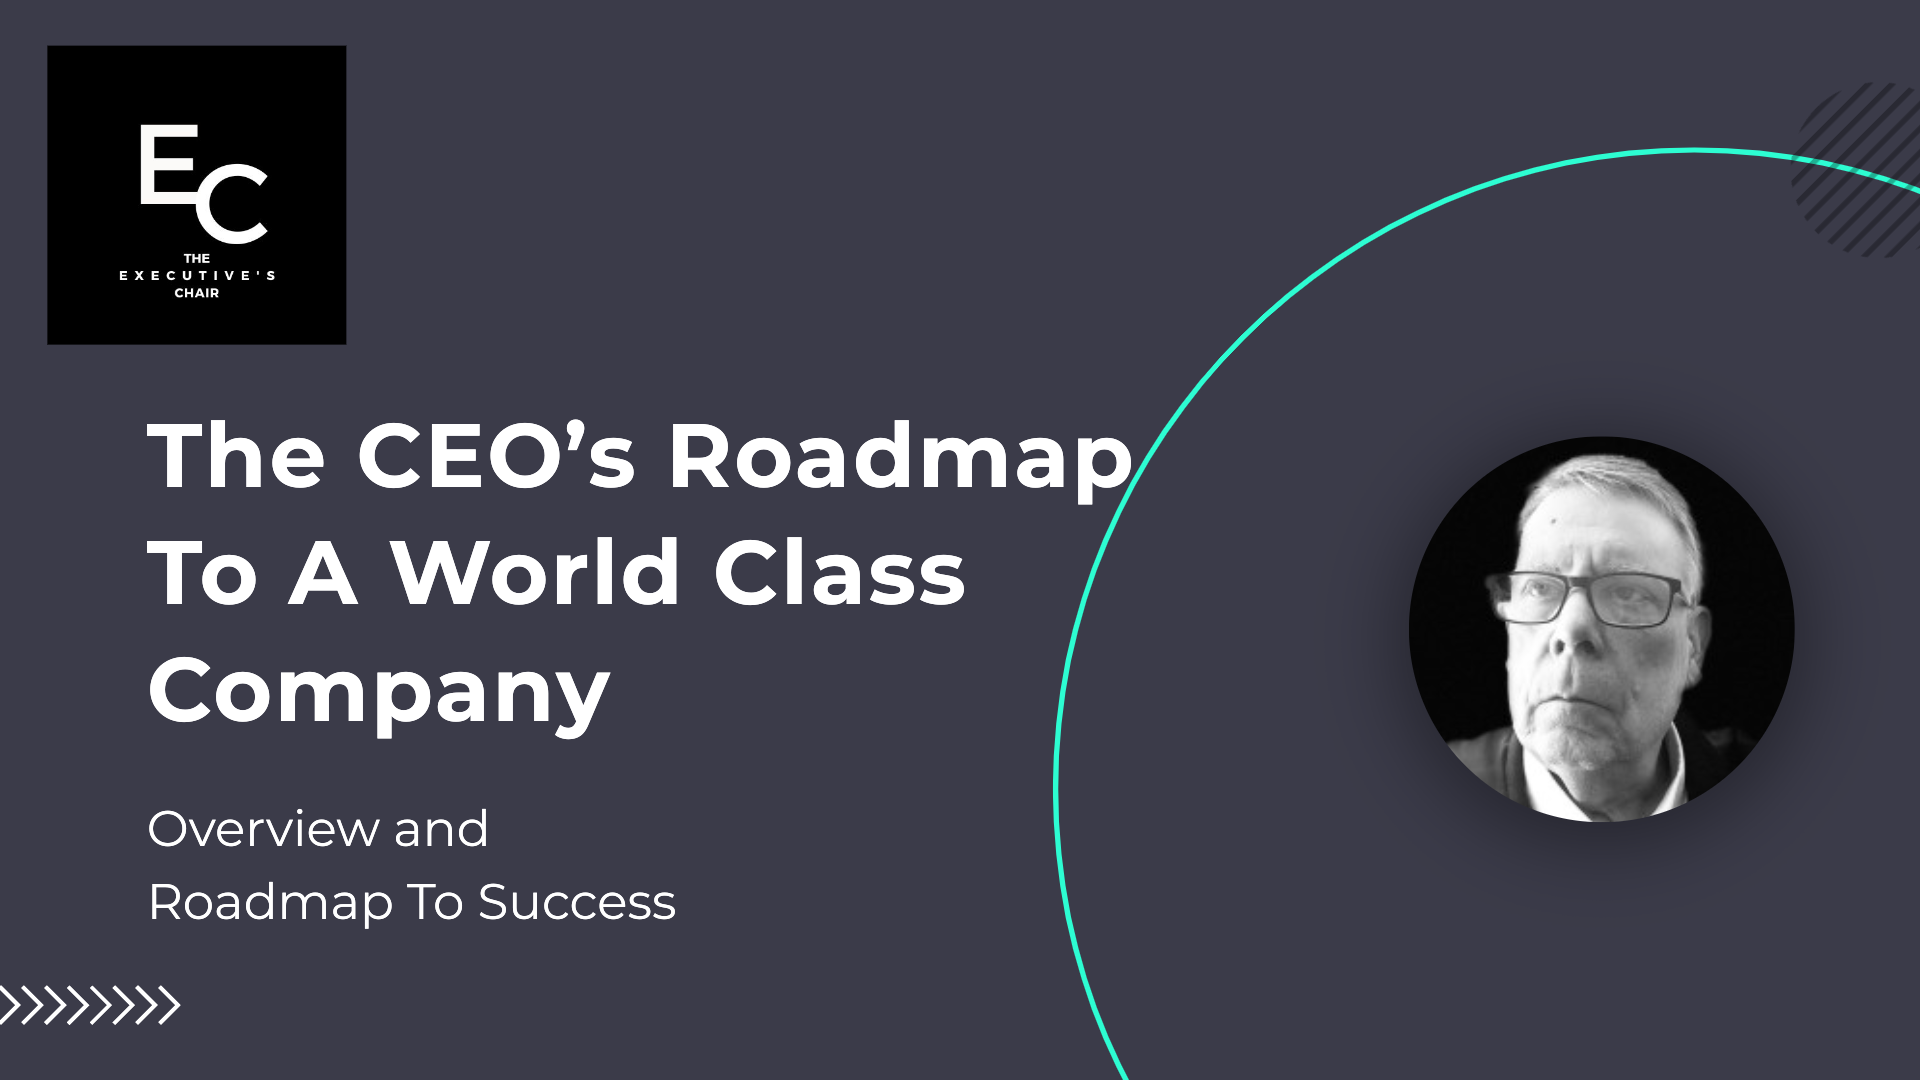 Overview and Roadmap To Success